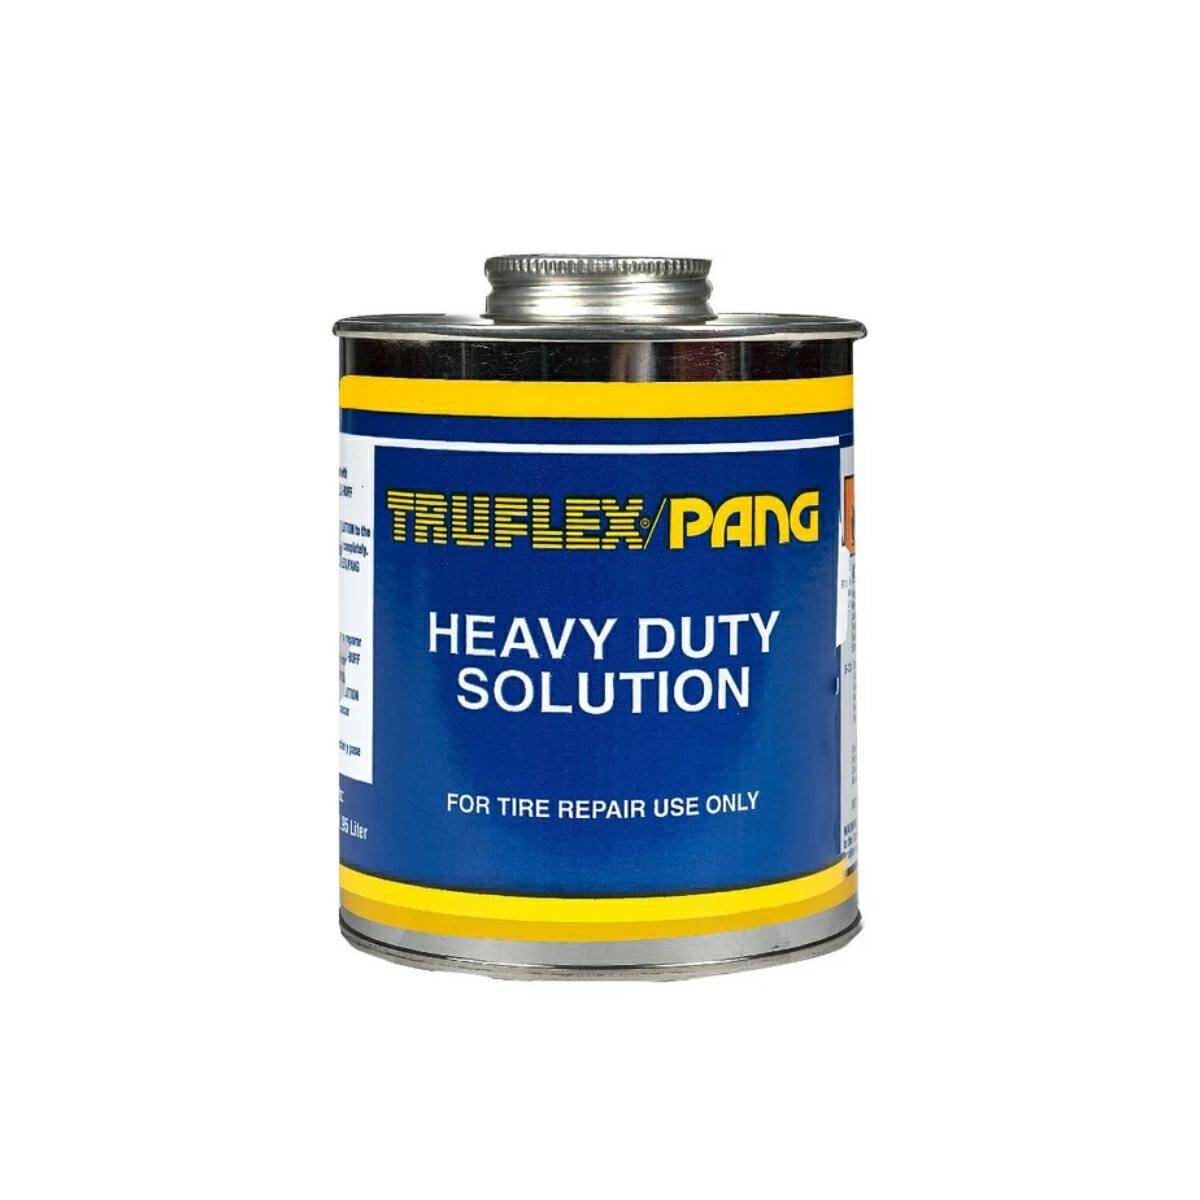 PANG HD Solution rubber glue 3.8 L